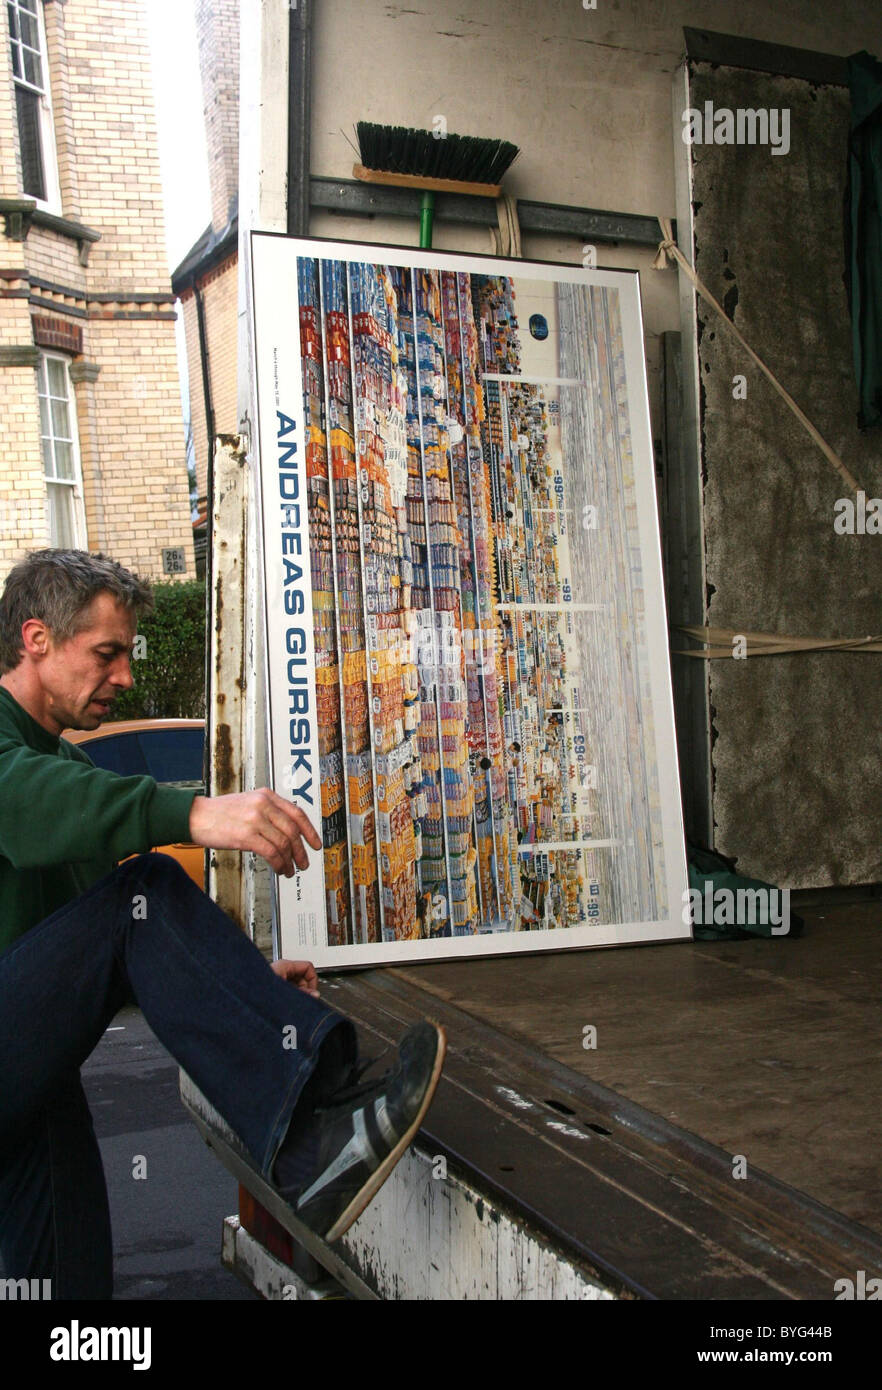 A framed Andreas is loaded into the van when Chantelle Houghton and Samuel Preston move house Brighton, England Photo - Alamy